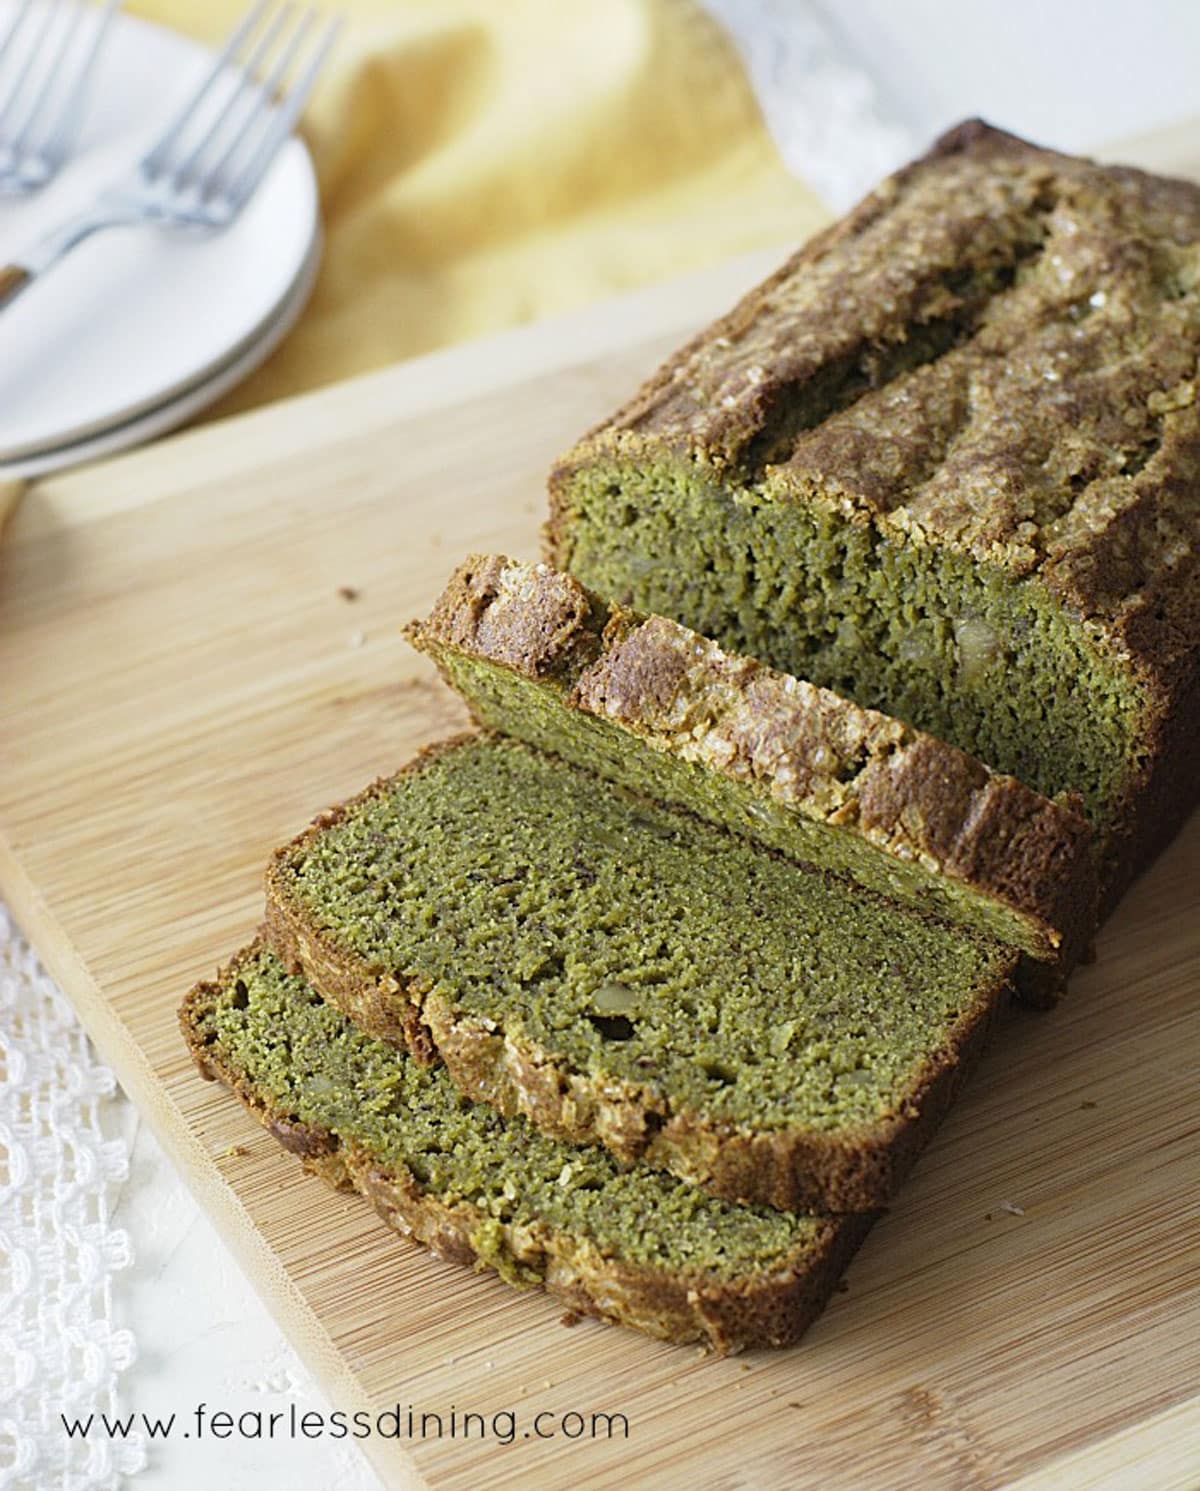 The top view of a sliced loaf of gluten-free matcha banana bread.